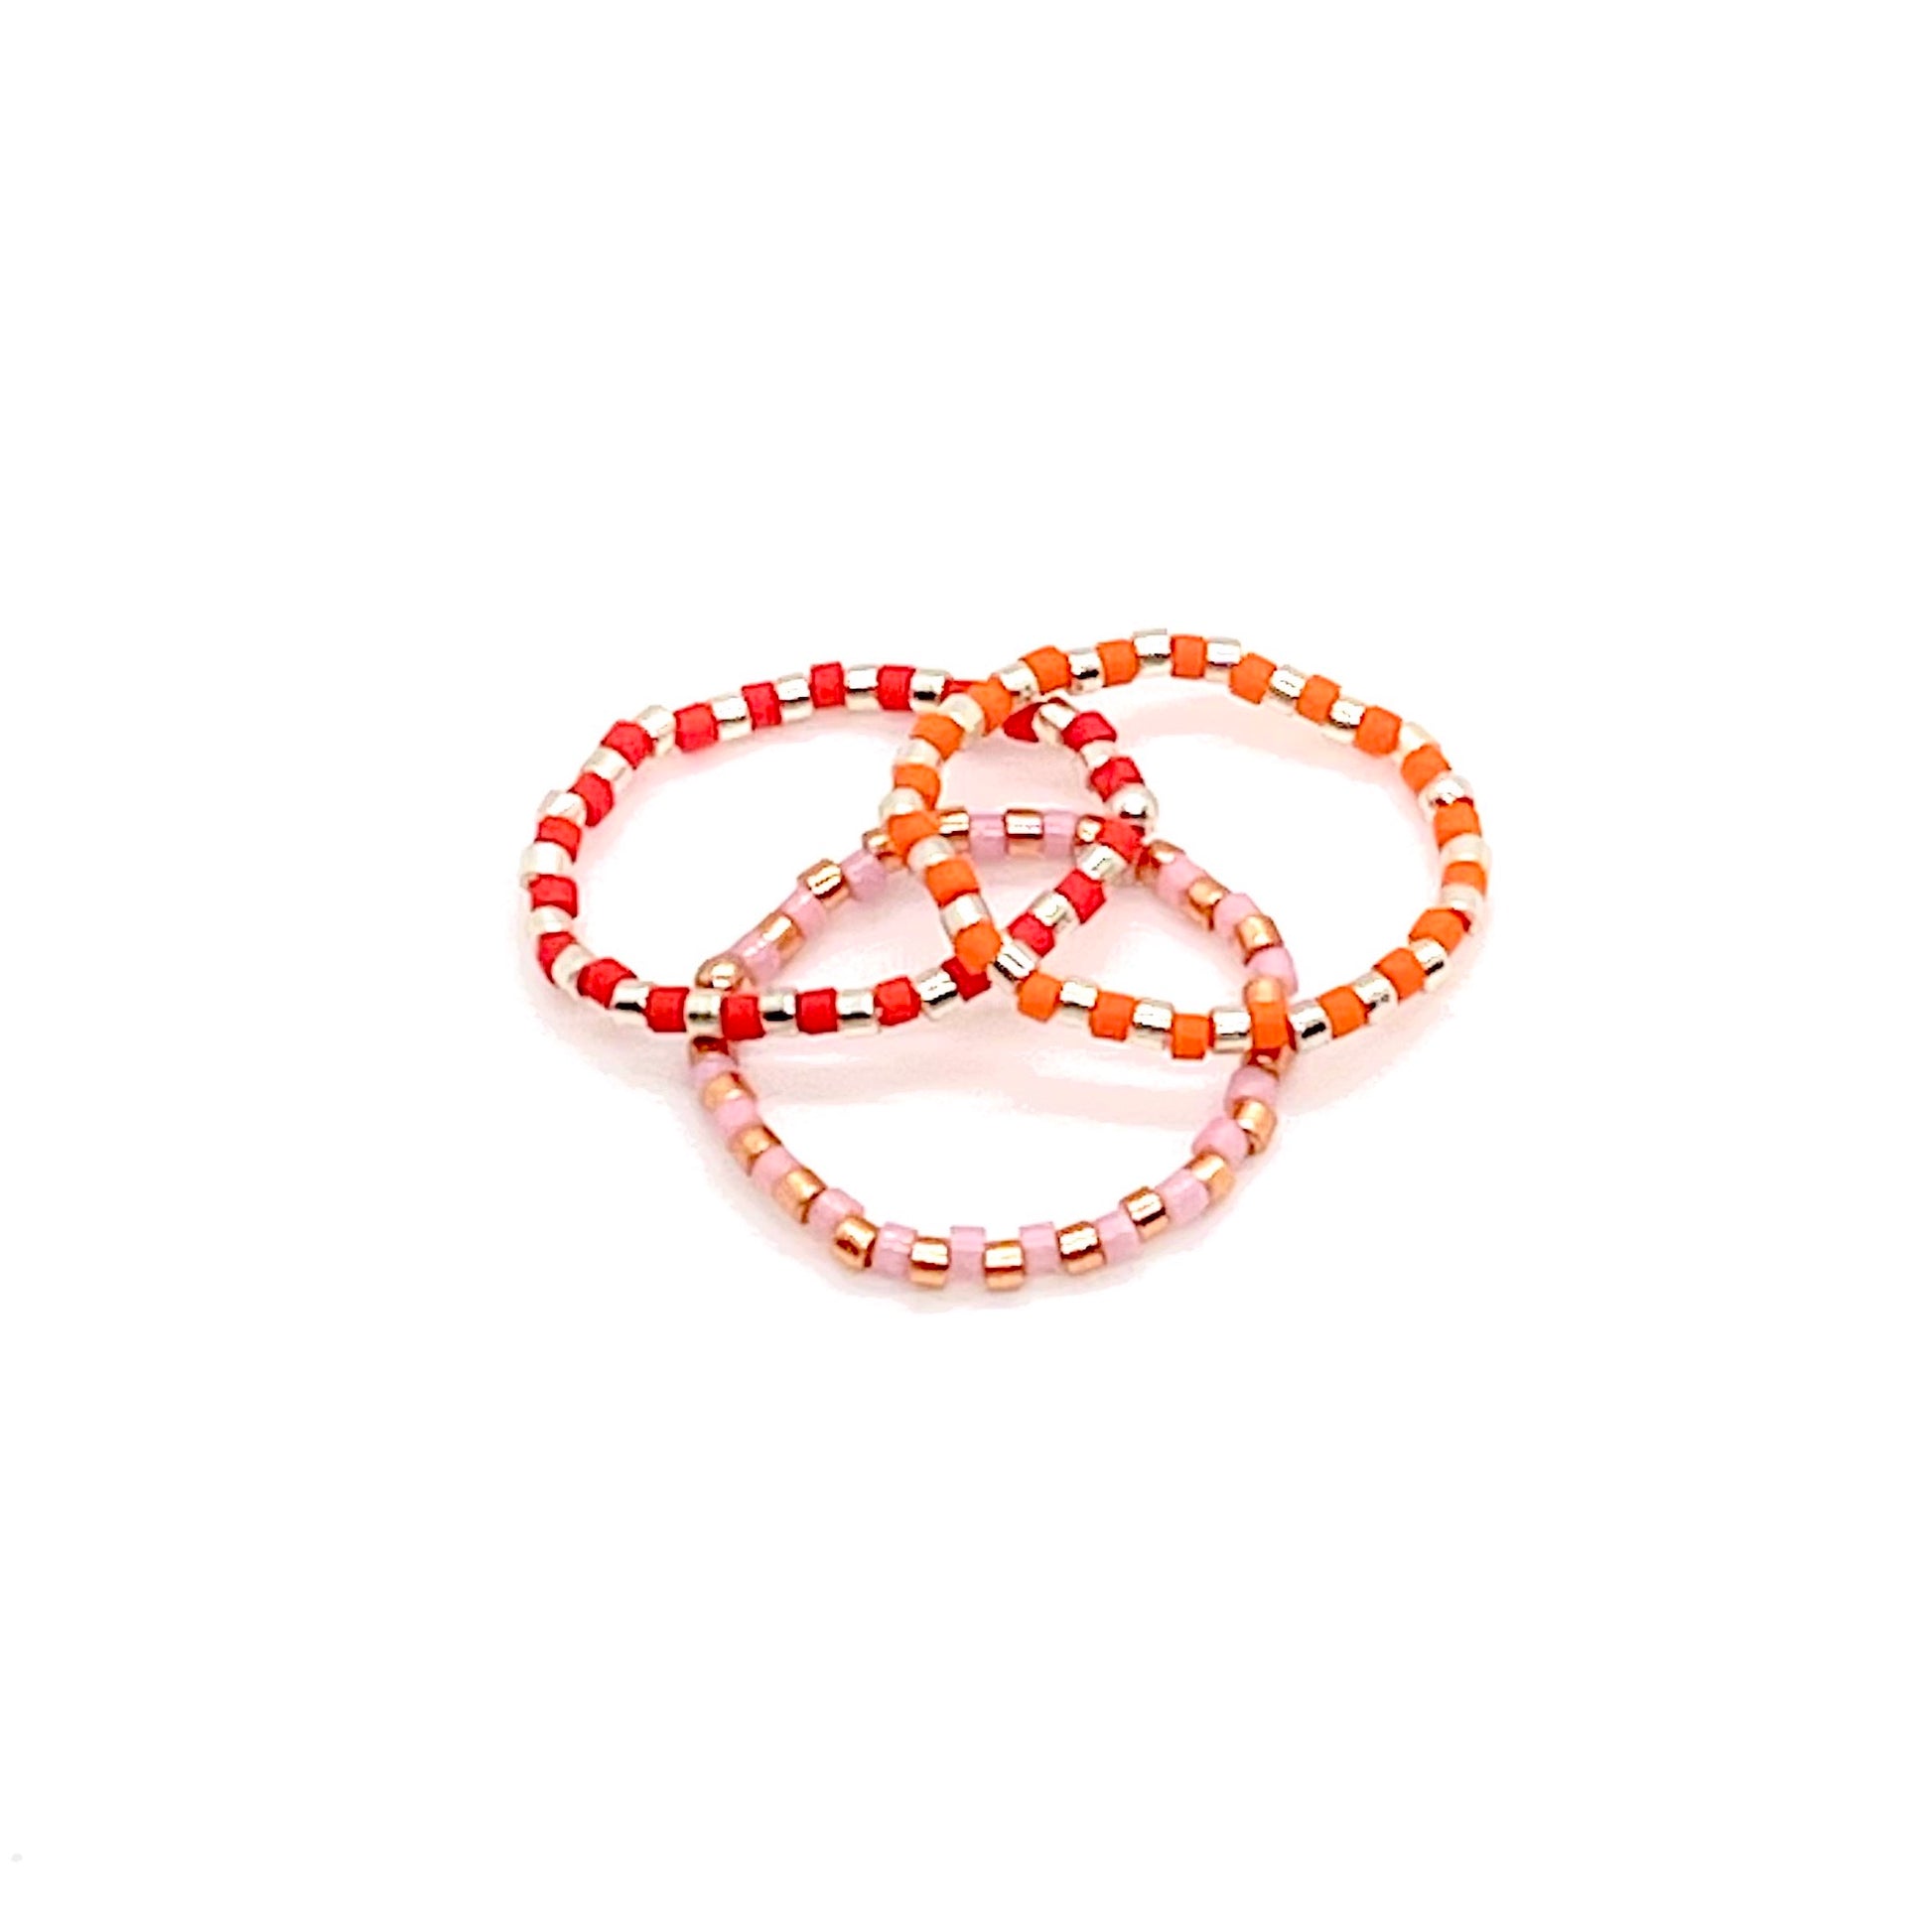 Beaded stretch ring set of 3 with metal-tone, and alternating pink, red, and orange Miyuki Delica seed beads.